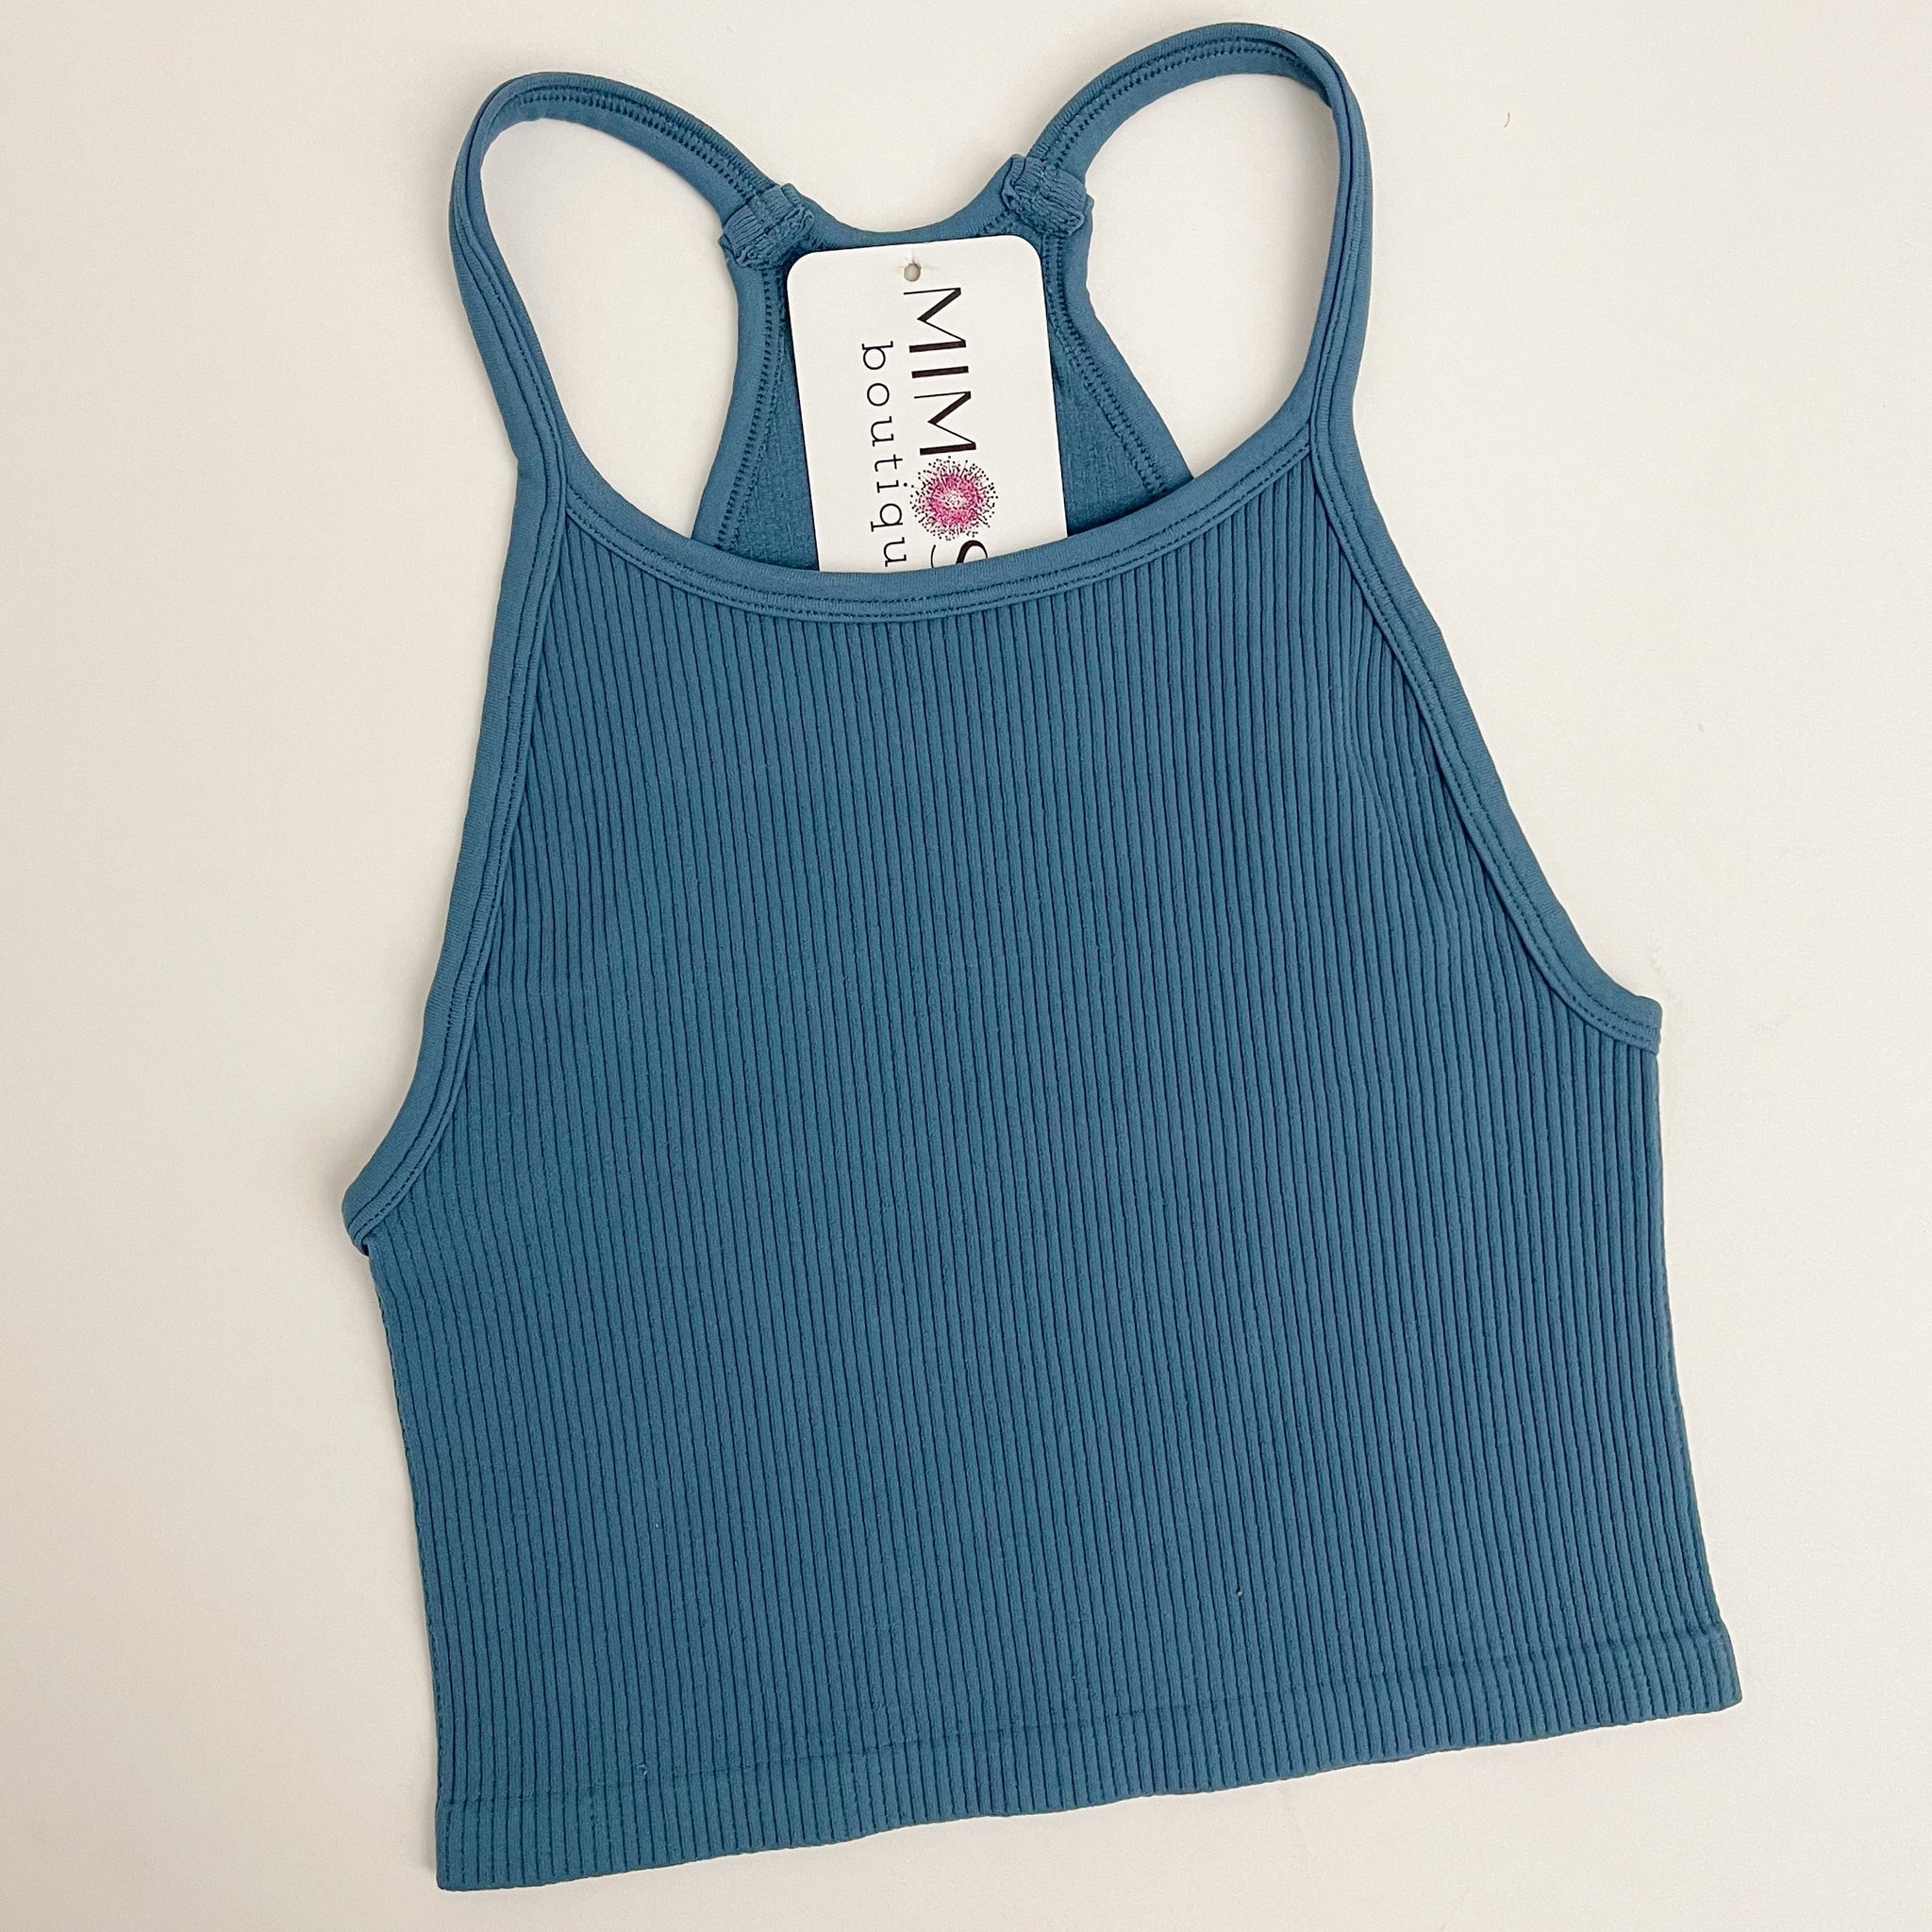 Knock Out Seamless Halter Top - Tops